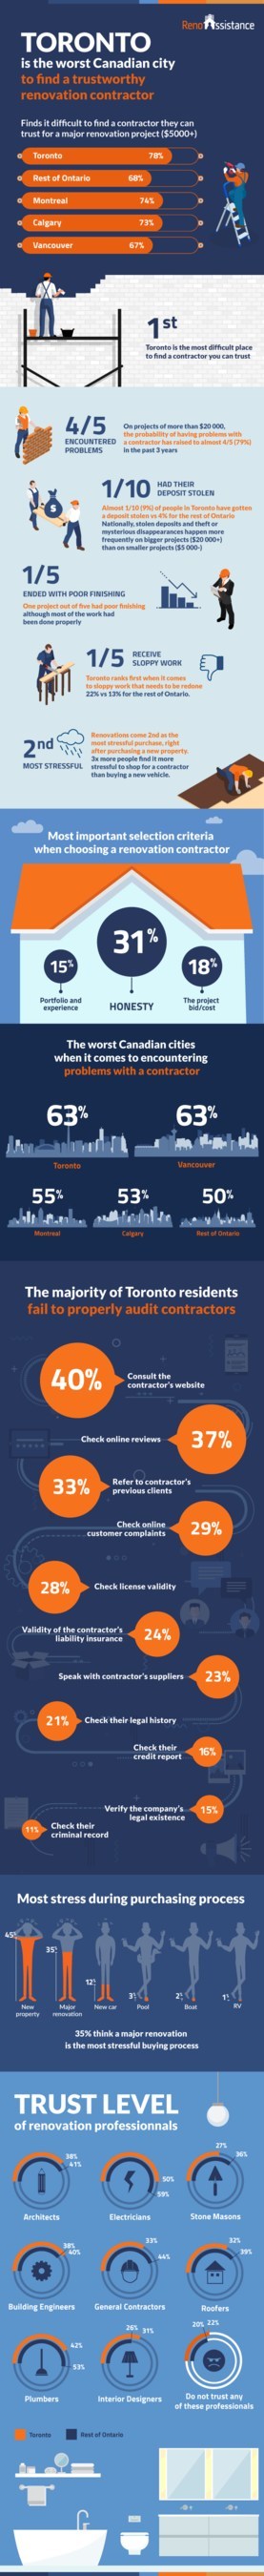 Toronto, the worst city in Canada for renovations with a contractor - Ipsos Survey